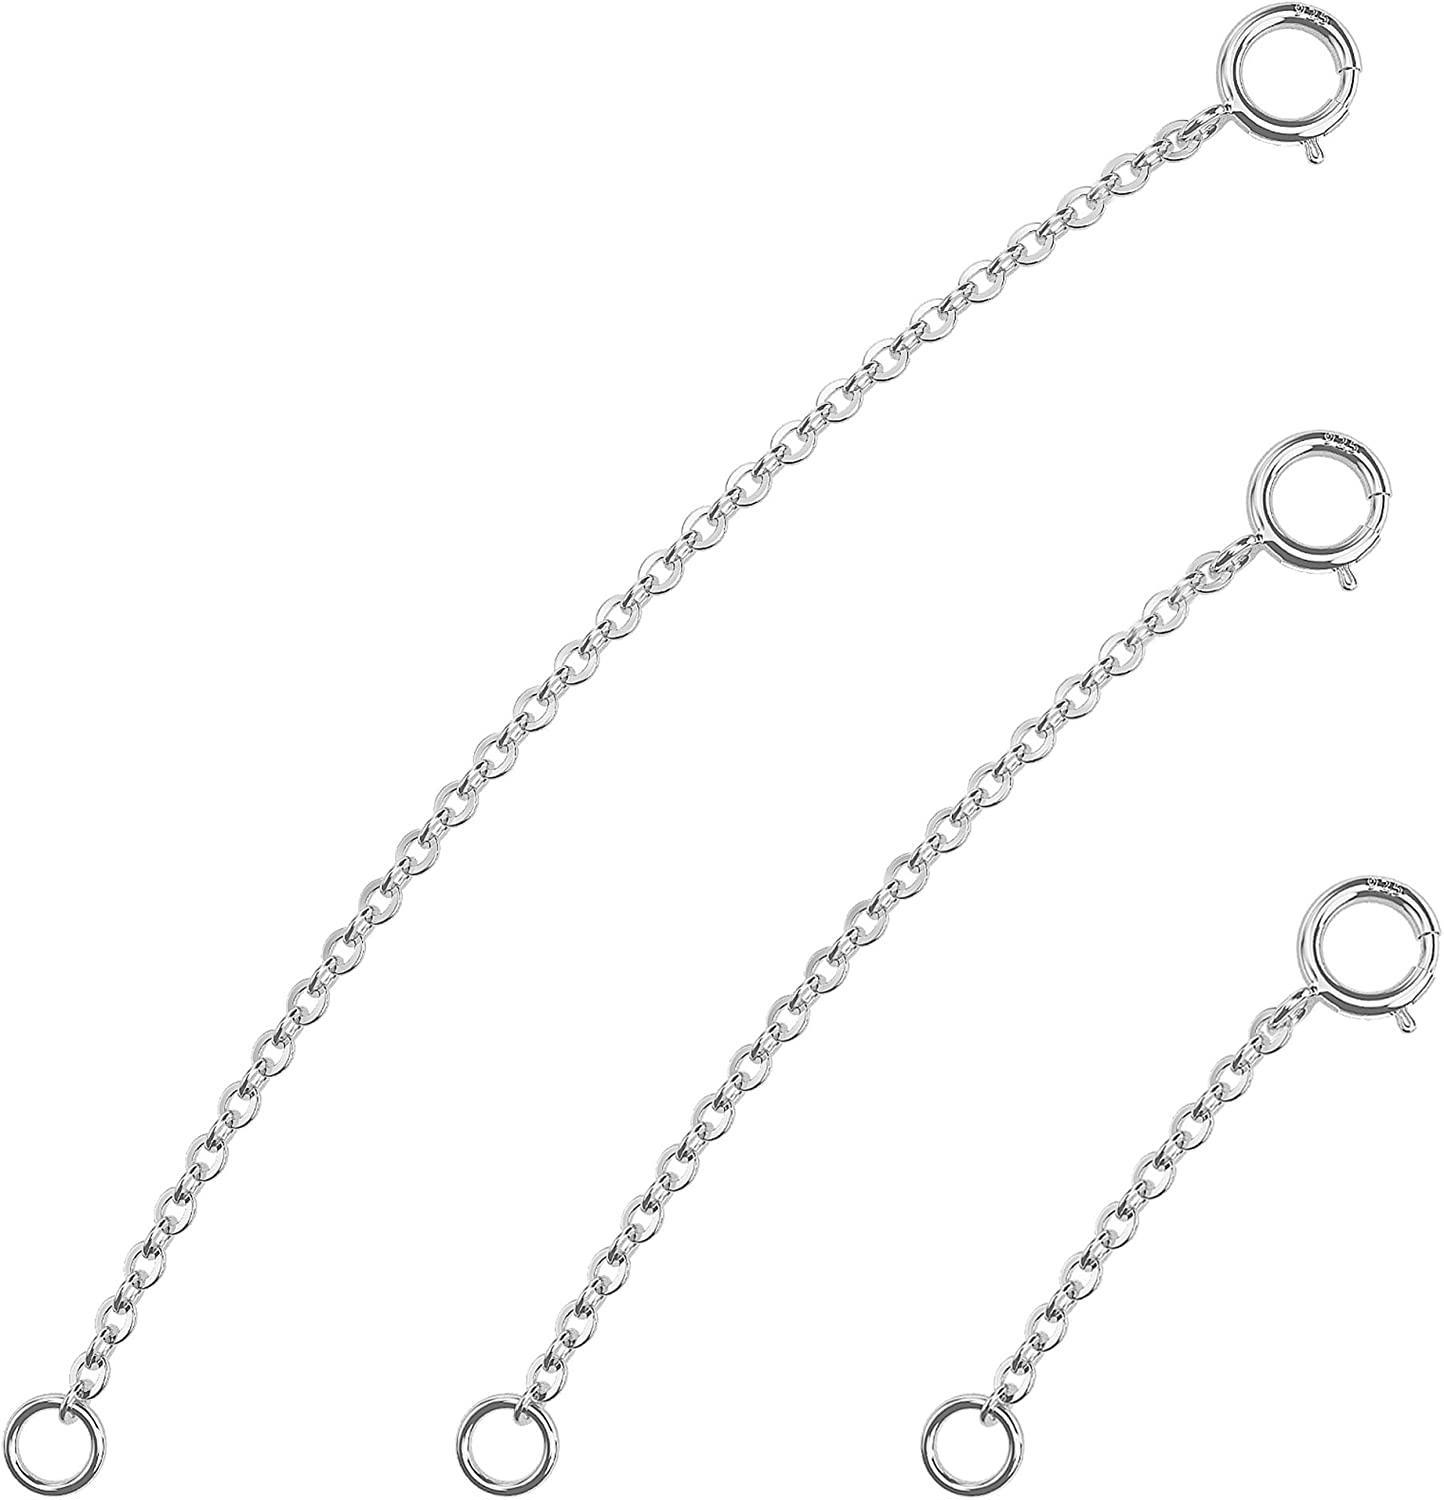 White Gold Necklace Extenders 925 Sterling Silver Necklace Bracelet Ankle  Extender Chain Extension for Jewelry Making（2 3 4 inch） 